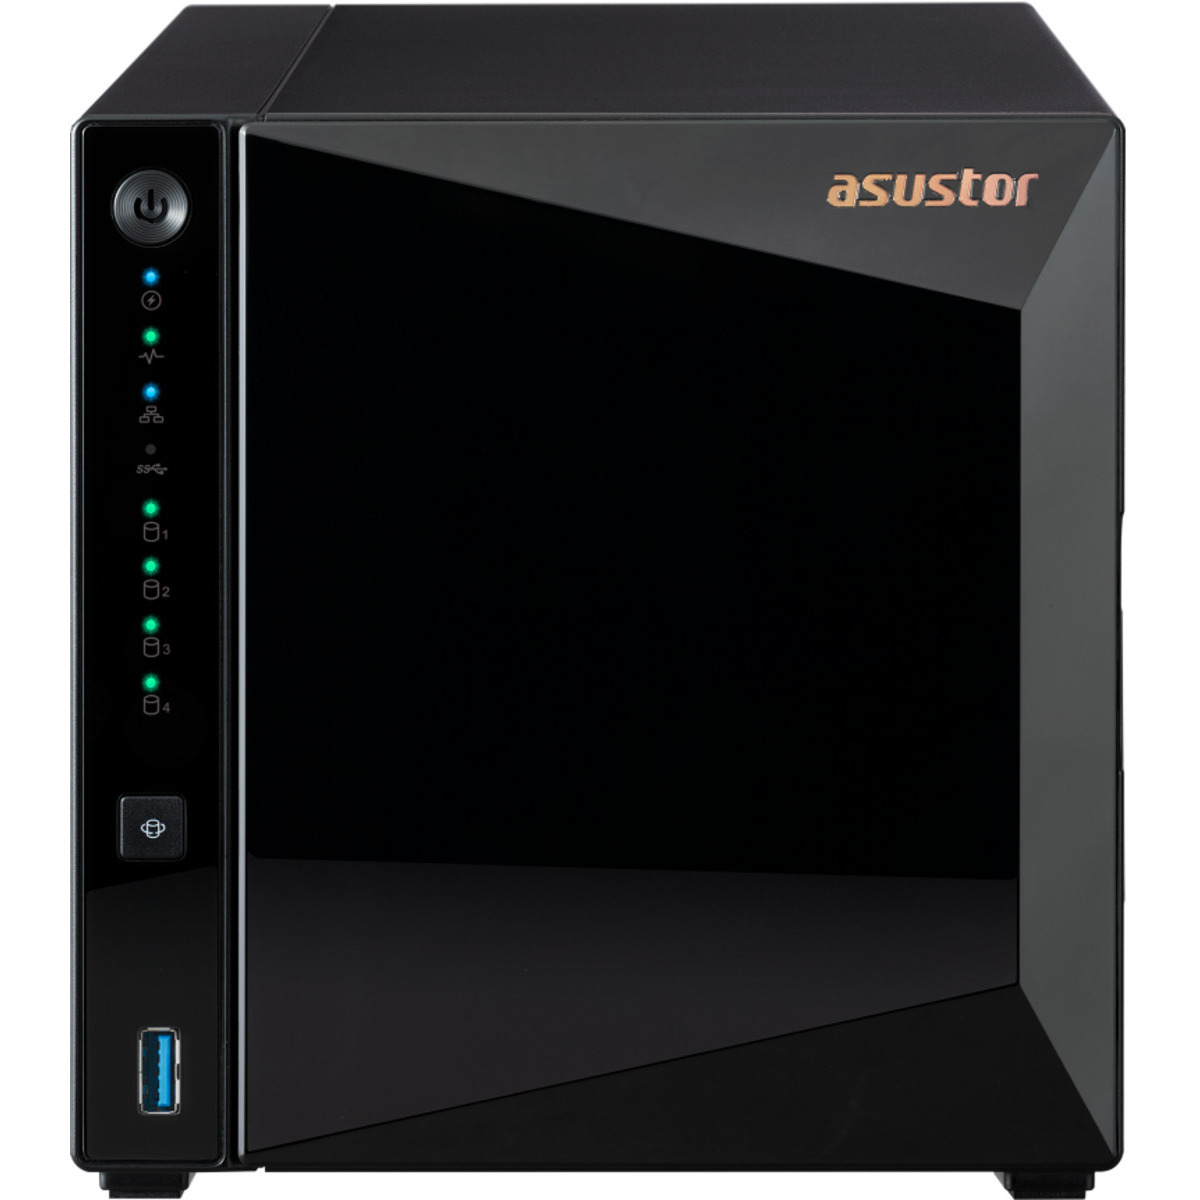 buy ASUSTOR DRIVESTOR 4 Pro Gen2 AS3304T v2 88tb Desktop NAS - Network Attached Storage Device 4x22000gb Western Digital Red Pro WD221KFGX 3.5 7200rpm SATA 6Gb/s HDD NAS Class Drives Installed - Burn-In Tested - nas headquarters buy network attached storage server device das new raid-5 free shipping usa spring sale DRIVESTOR 4 Pro Gen2 AS3304T v2